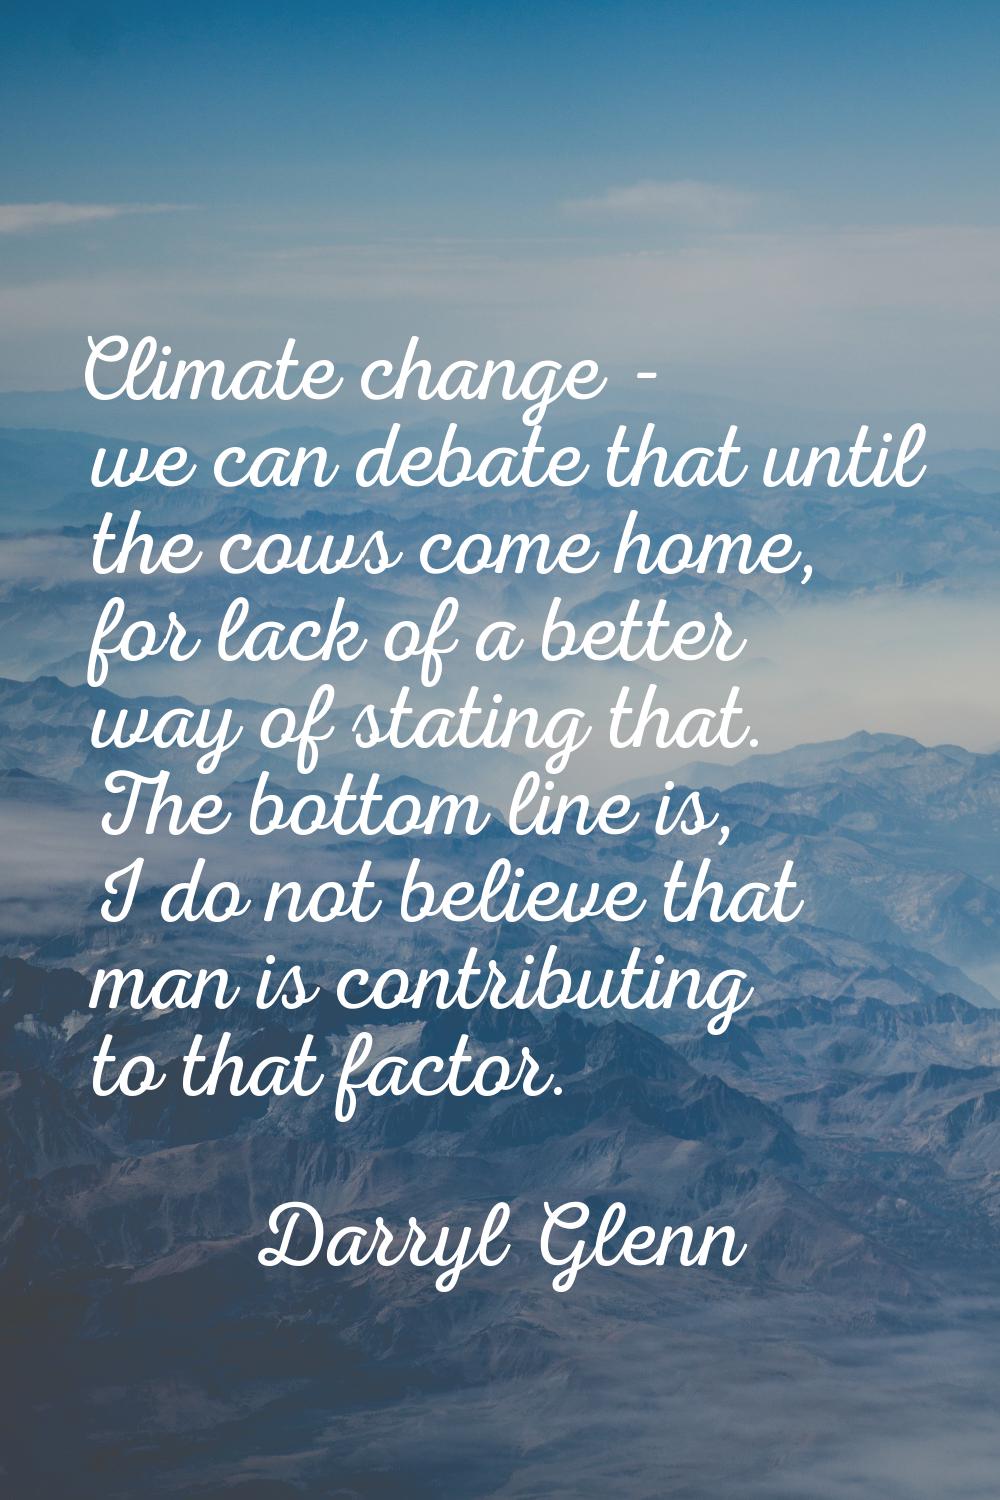 Climate change - we can debate that until the cows come home, for lack of a better way of stating t